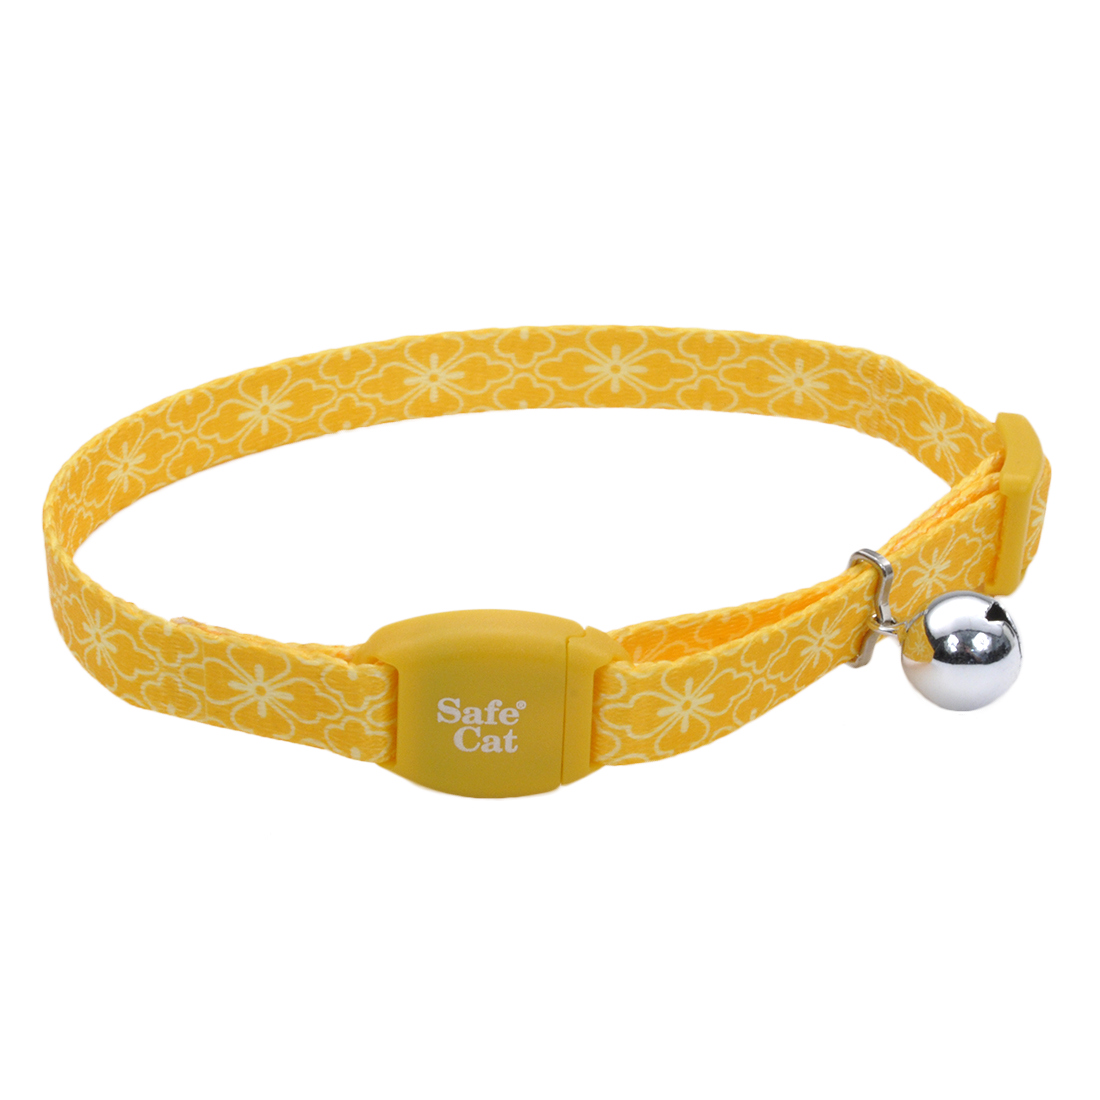 Coastal 3 and Safe Cat Break Away With Magnetic Buckle Collar Golden Flower Bouquet